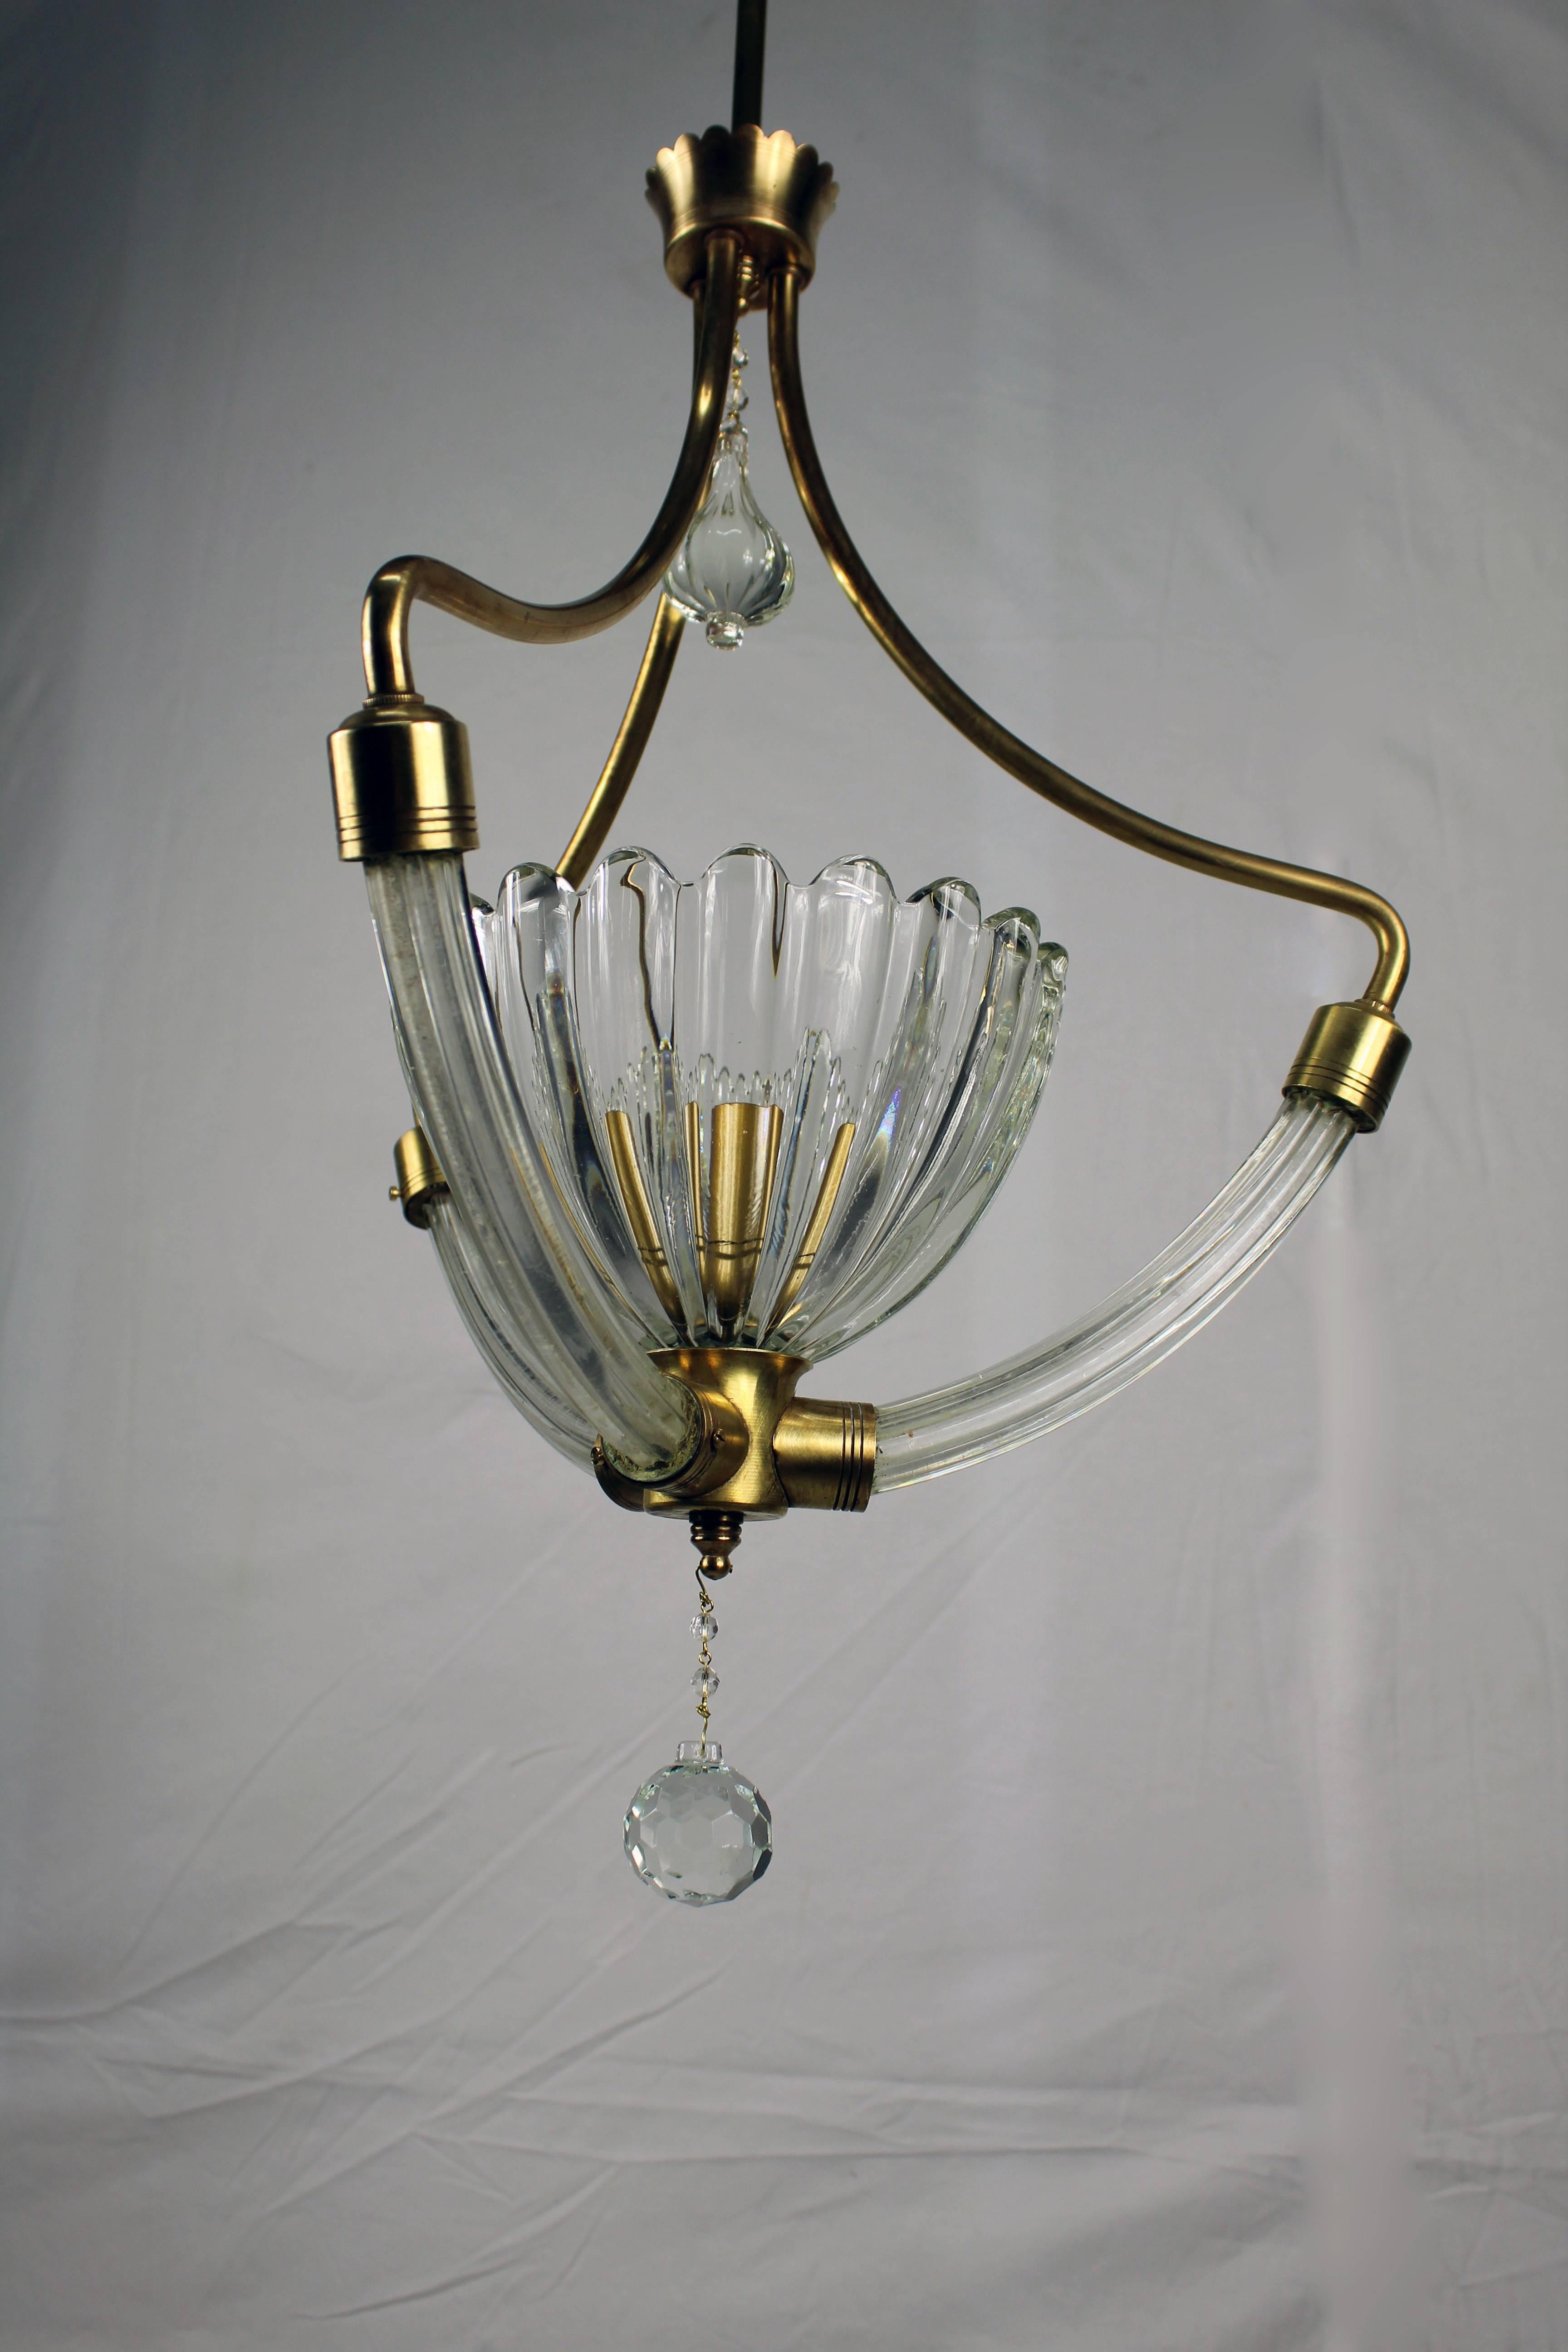 Chandelier made of Murano glass and brass finish.
Made in Italy, circa 1930.
Good conditions.